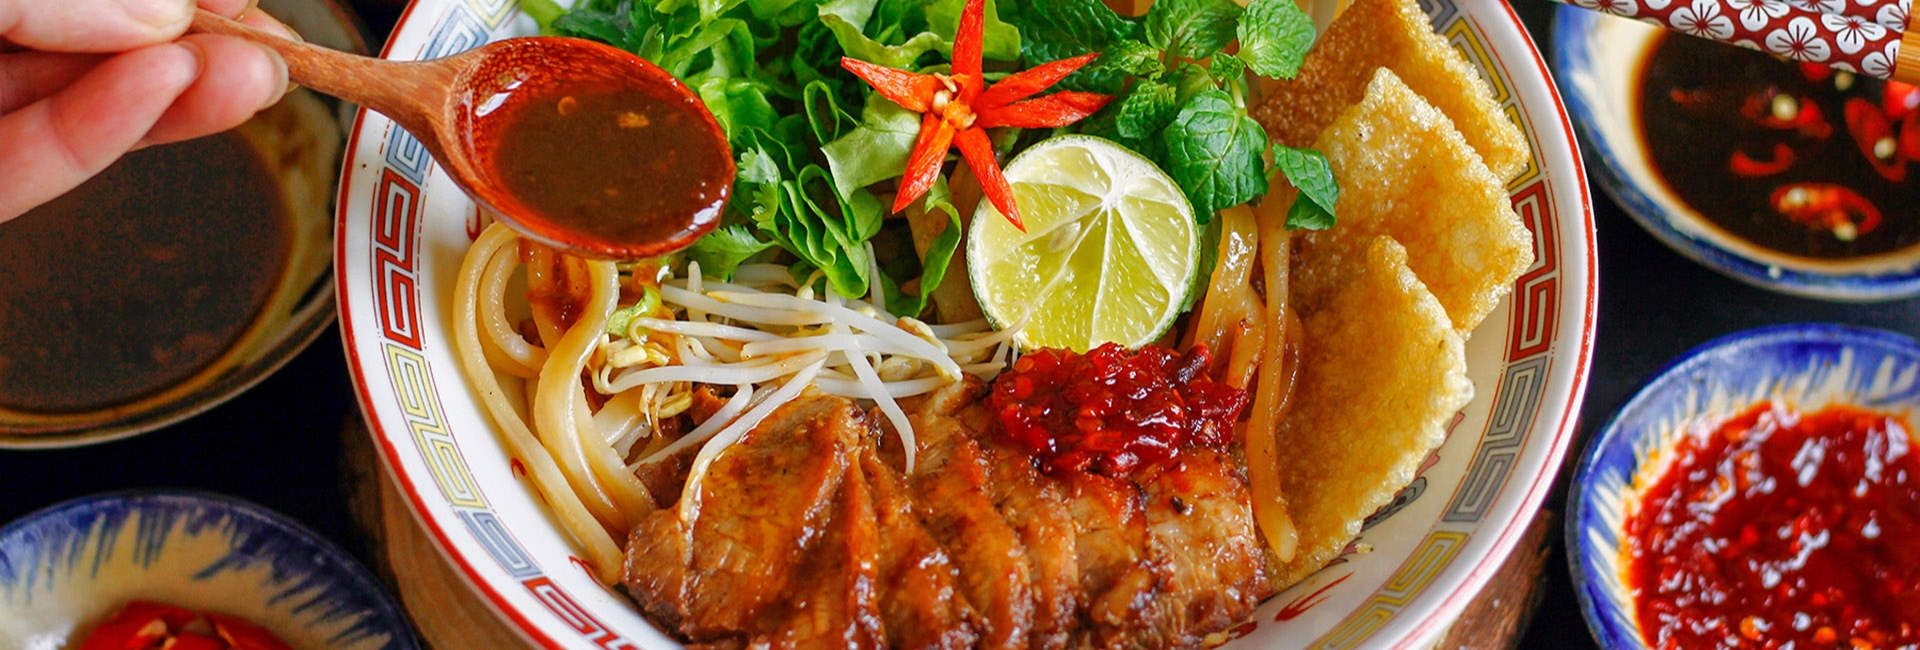 Top 9 Best Hoi An Food you must try for a lifetime – Complete Cuisine guide